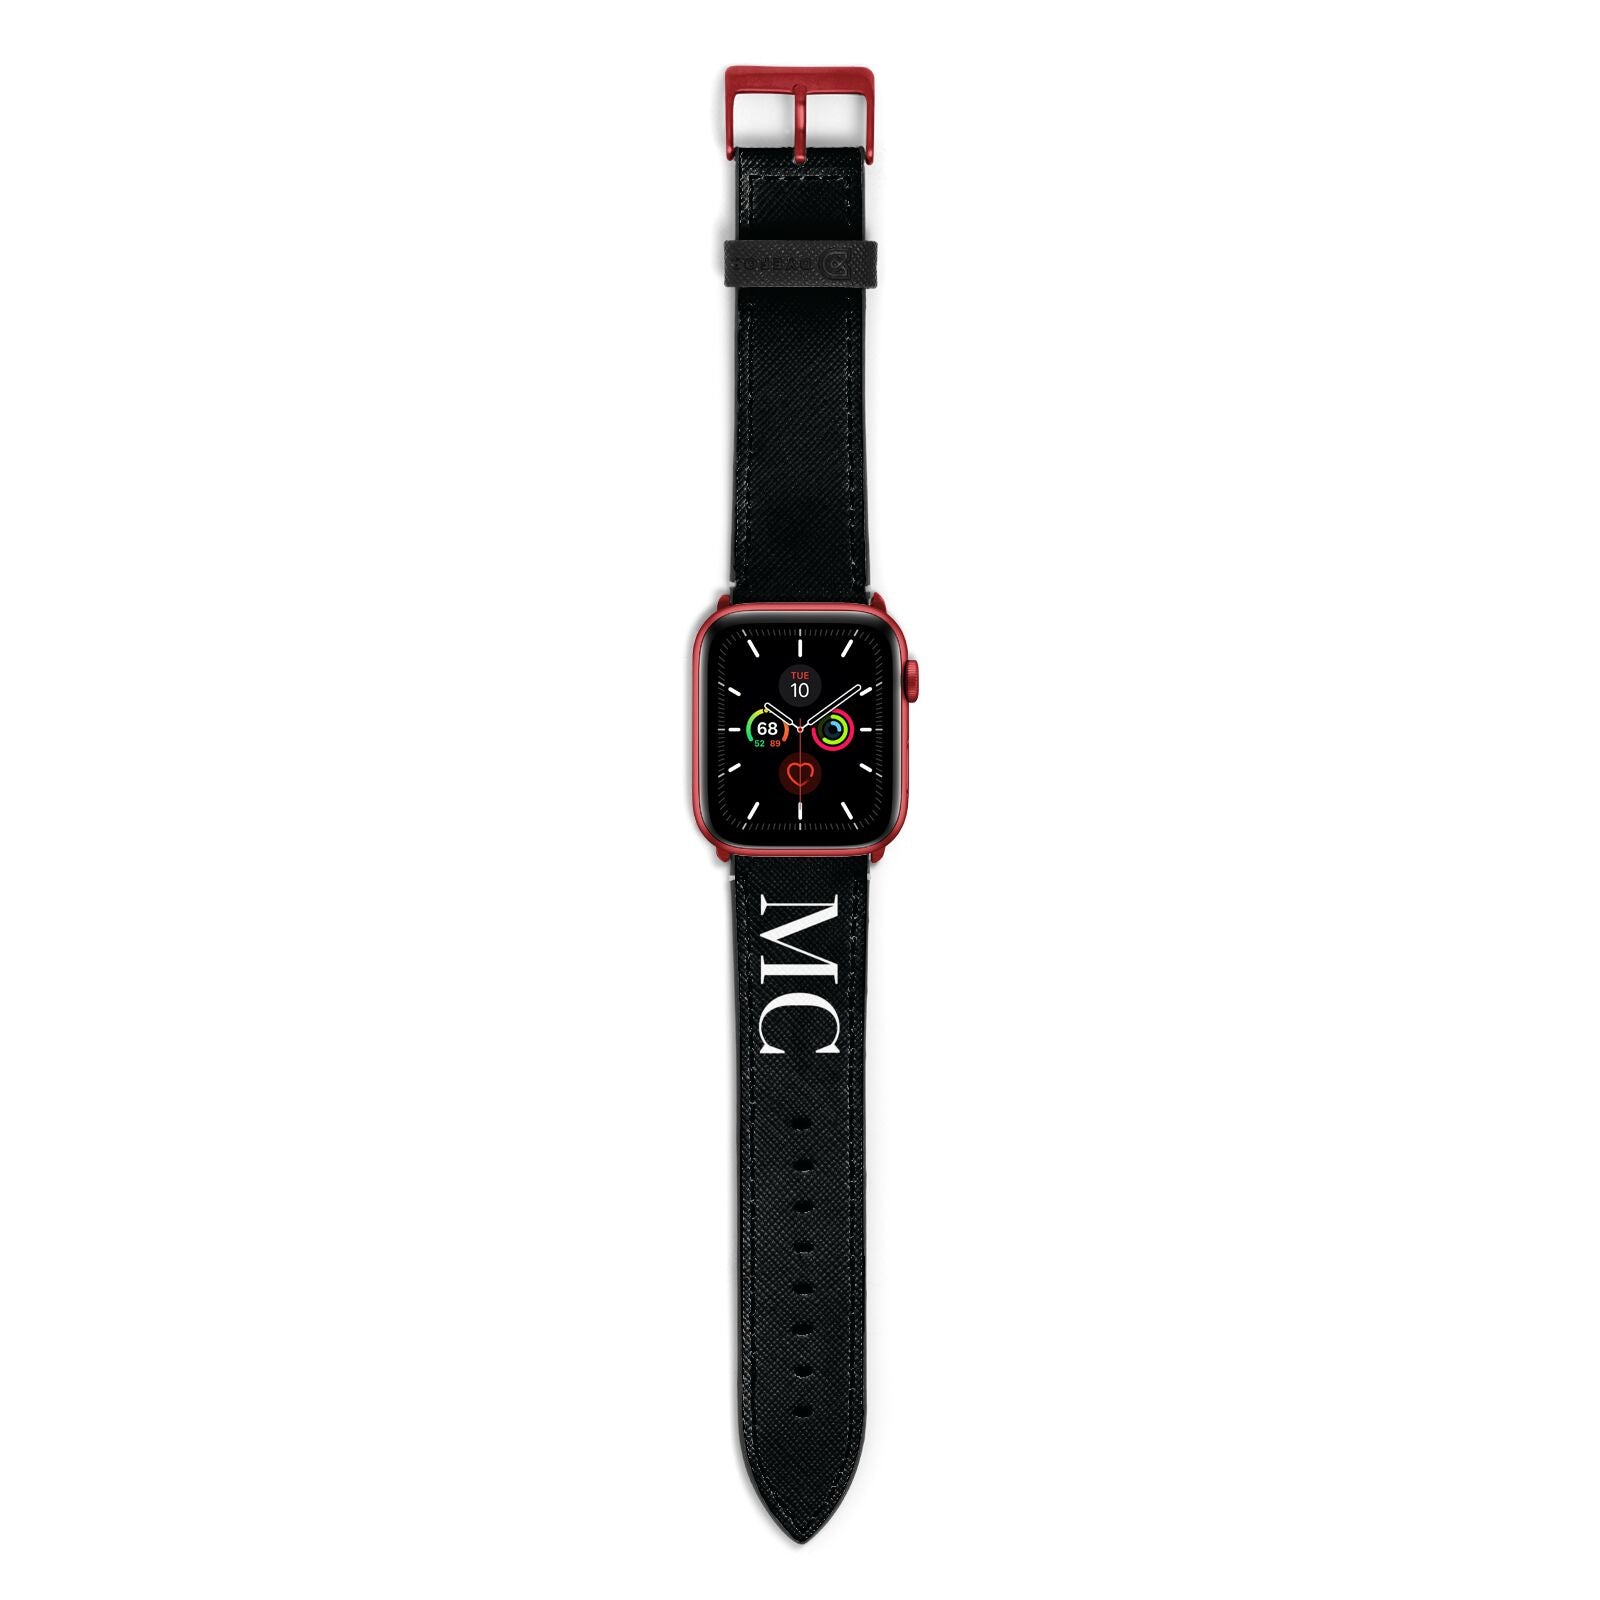 Initials Personalised 1 Apple Watch Strap with Red Hardware